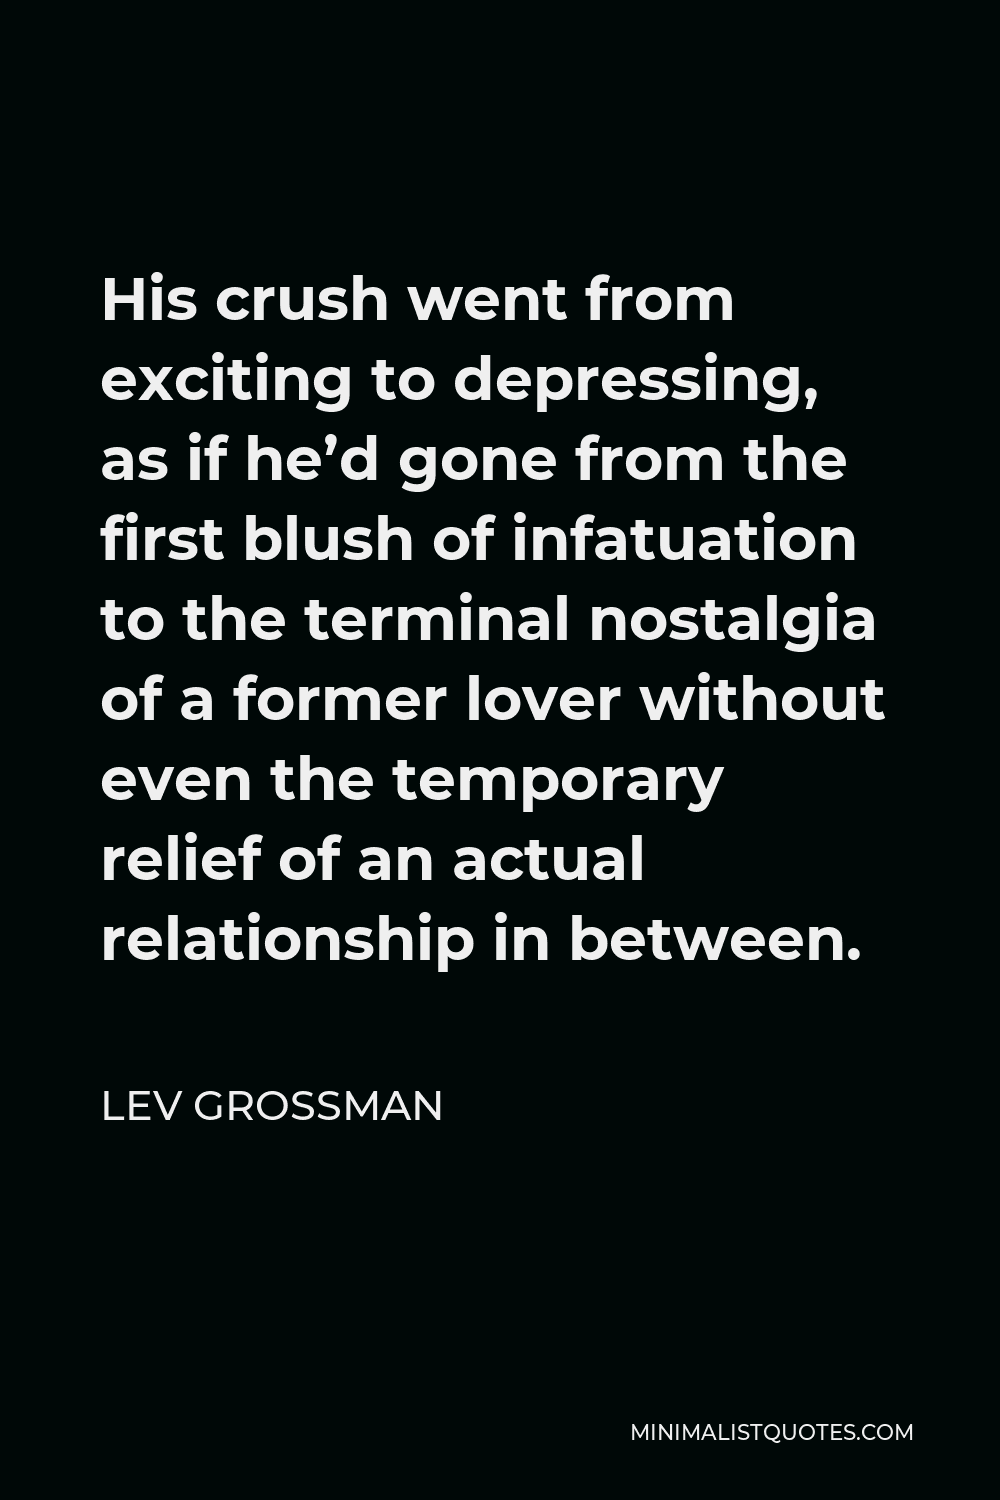 Lev Grossman Quote - His crush went from exciting to depressing, as if he’d gone from the first blush of infatuation to the terminal nostalgia of a former lover without even the temporary relief of an actual relationship in between.